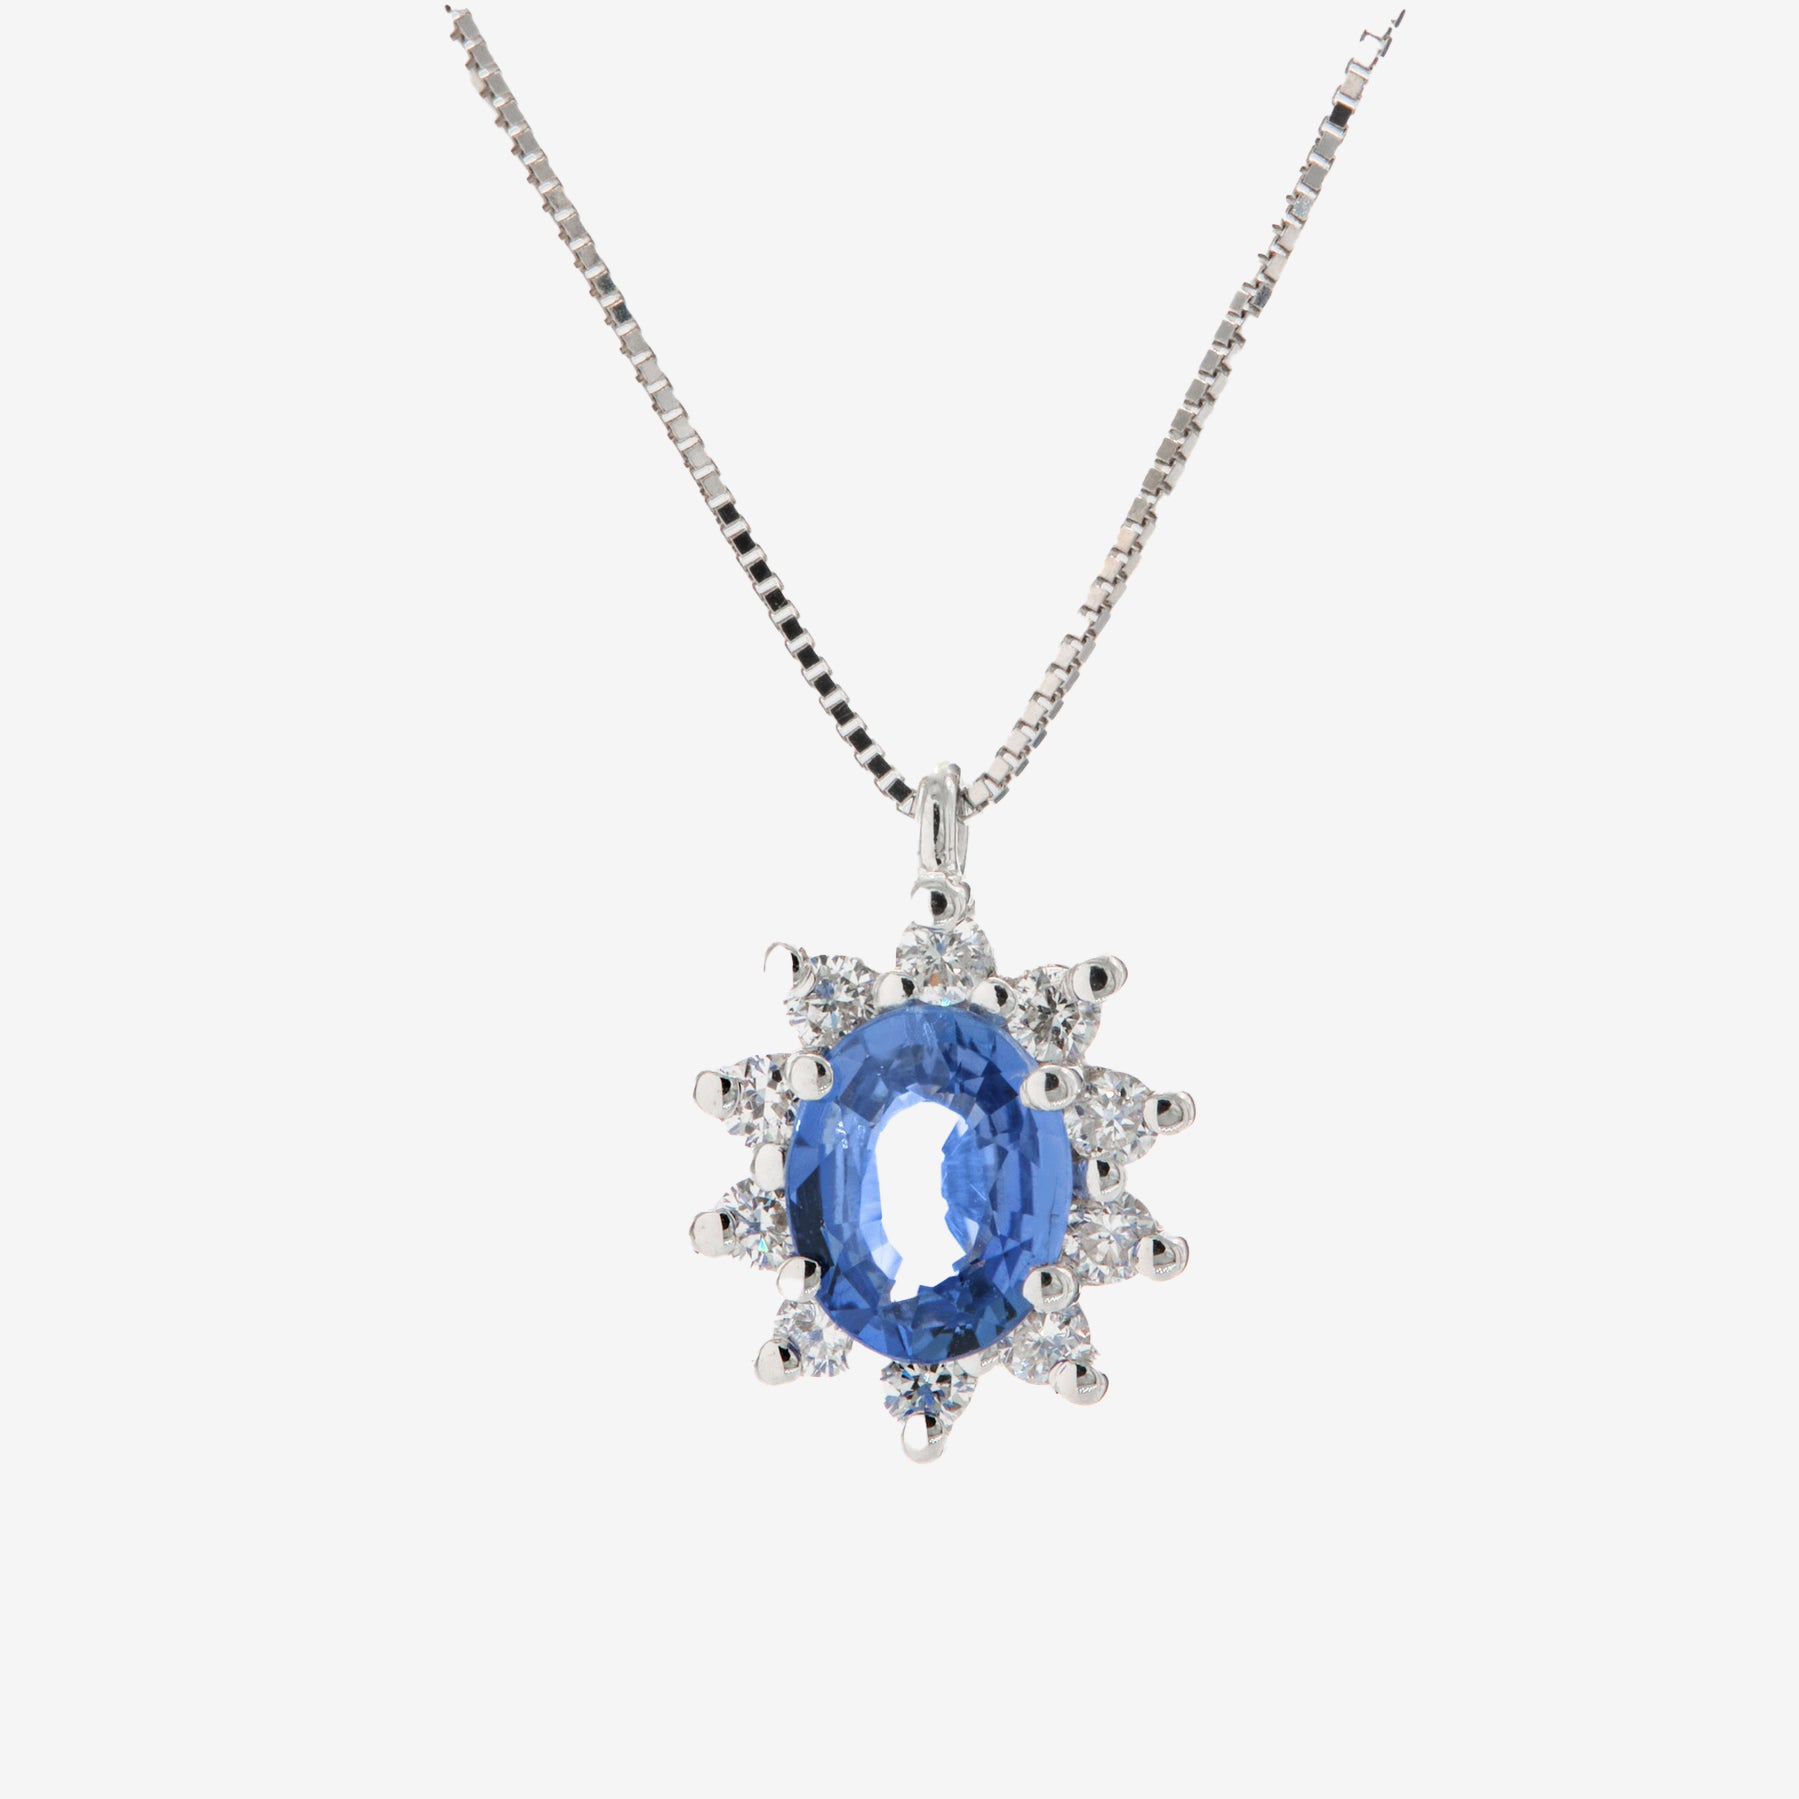 Lana necklace with sapphire and diamonds